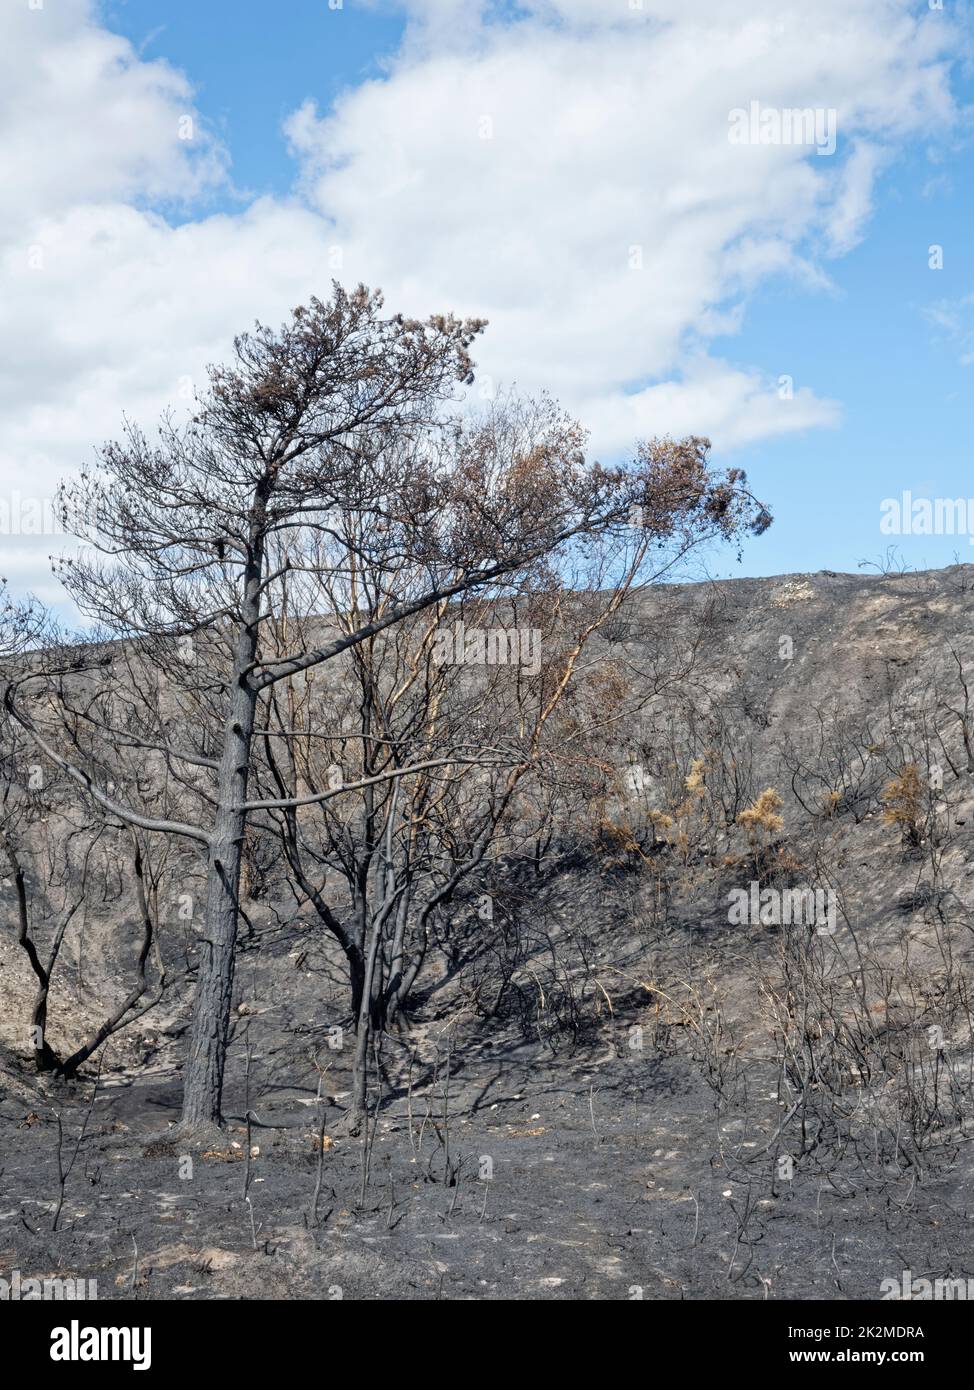 Heathland bushes and trees badly burnt by a major fire, likely started by a disposable barbecue, Studland Heath, Isle of Purbeck, August 2022. Stock Photo